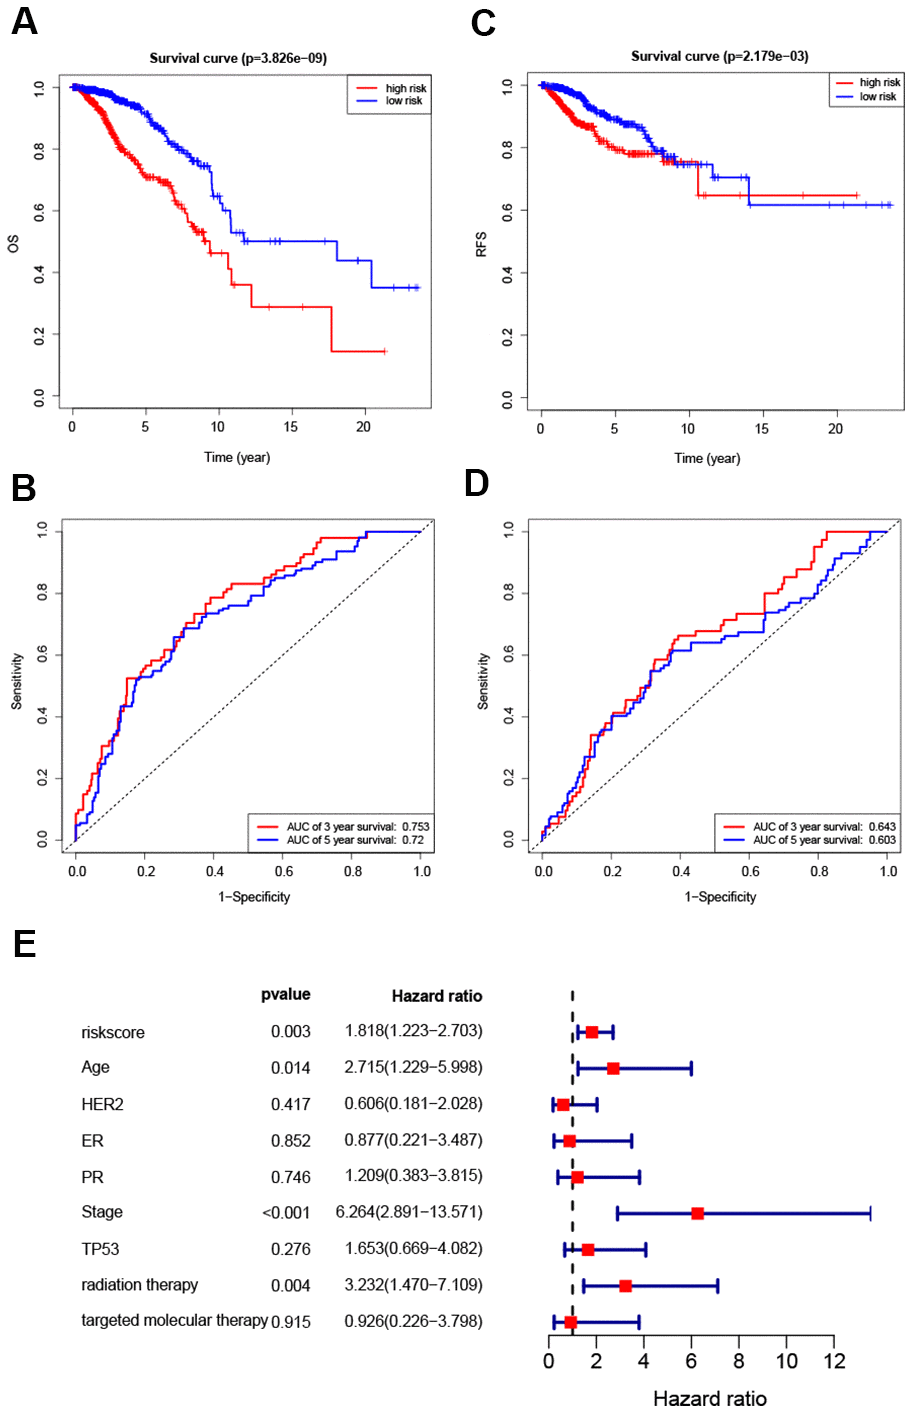 Survival analysis of high- and low-risk breast cancer patients. (A, B) Analysis of OS in high- and low-risk breast cancer patients. (C, D) Analysis of RFS in high- and low-risk breast cancer patients. (E) Hazard ratio of the eight-gene signature and important clinical variables.